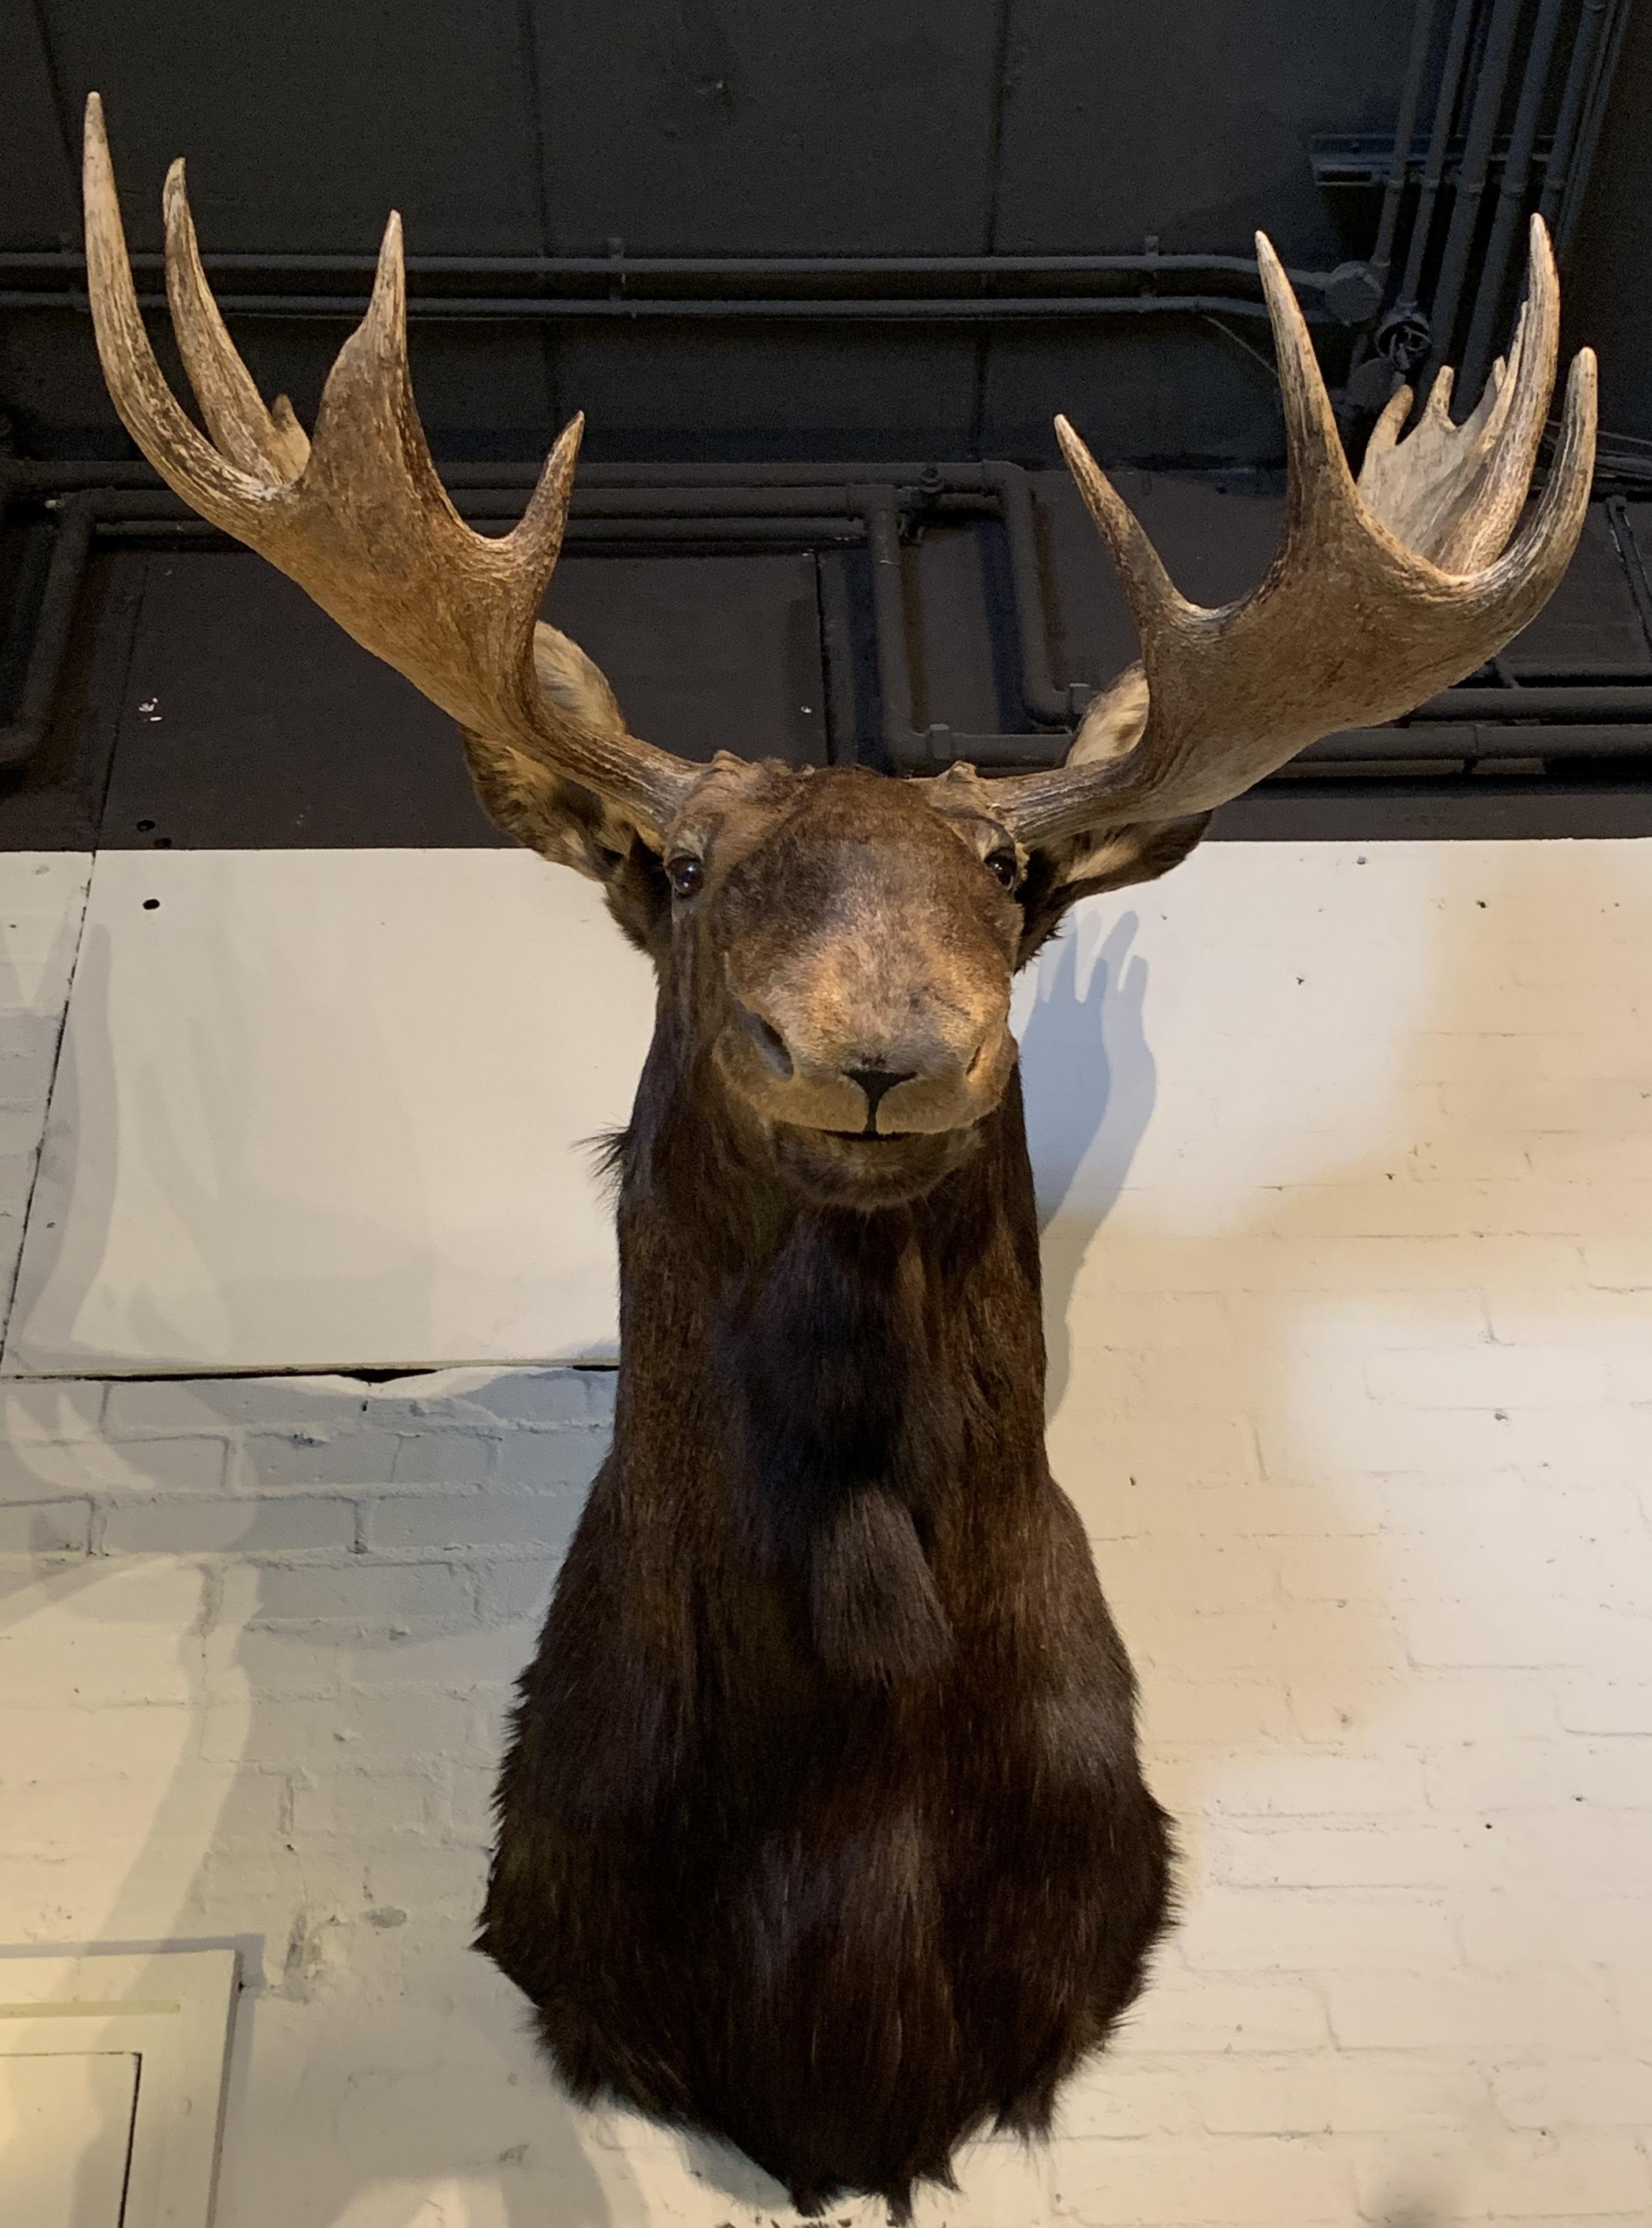 Enormous shoulder mount of a Canadian 'Yukon' moose. This head is made very life like and whit great attention for detail. Perfect eye catcher for an alpine chalet
It has detachable antlers which is easy for shipment.